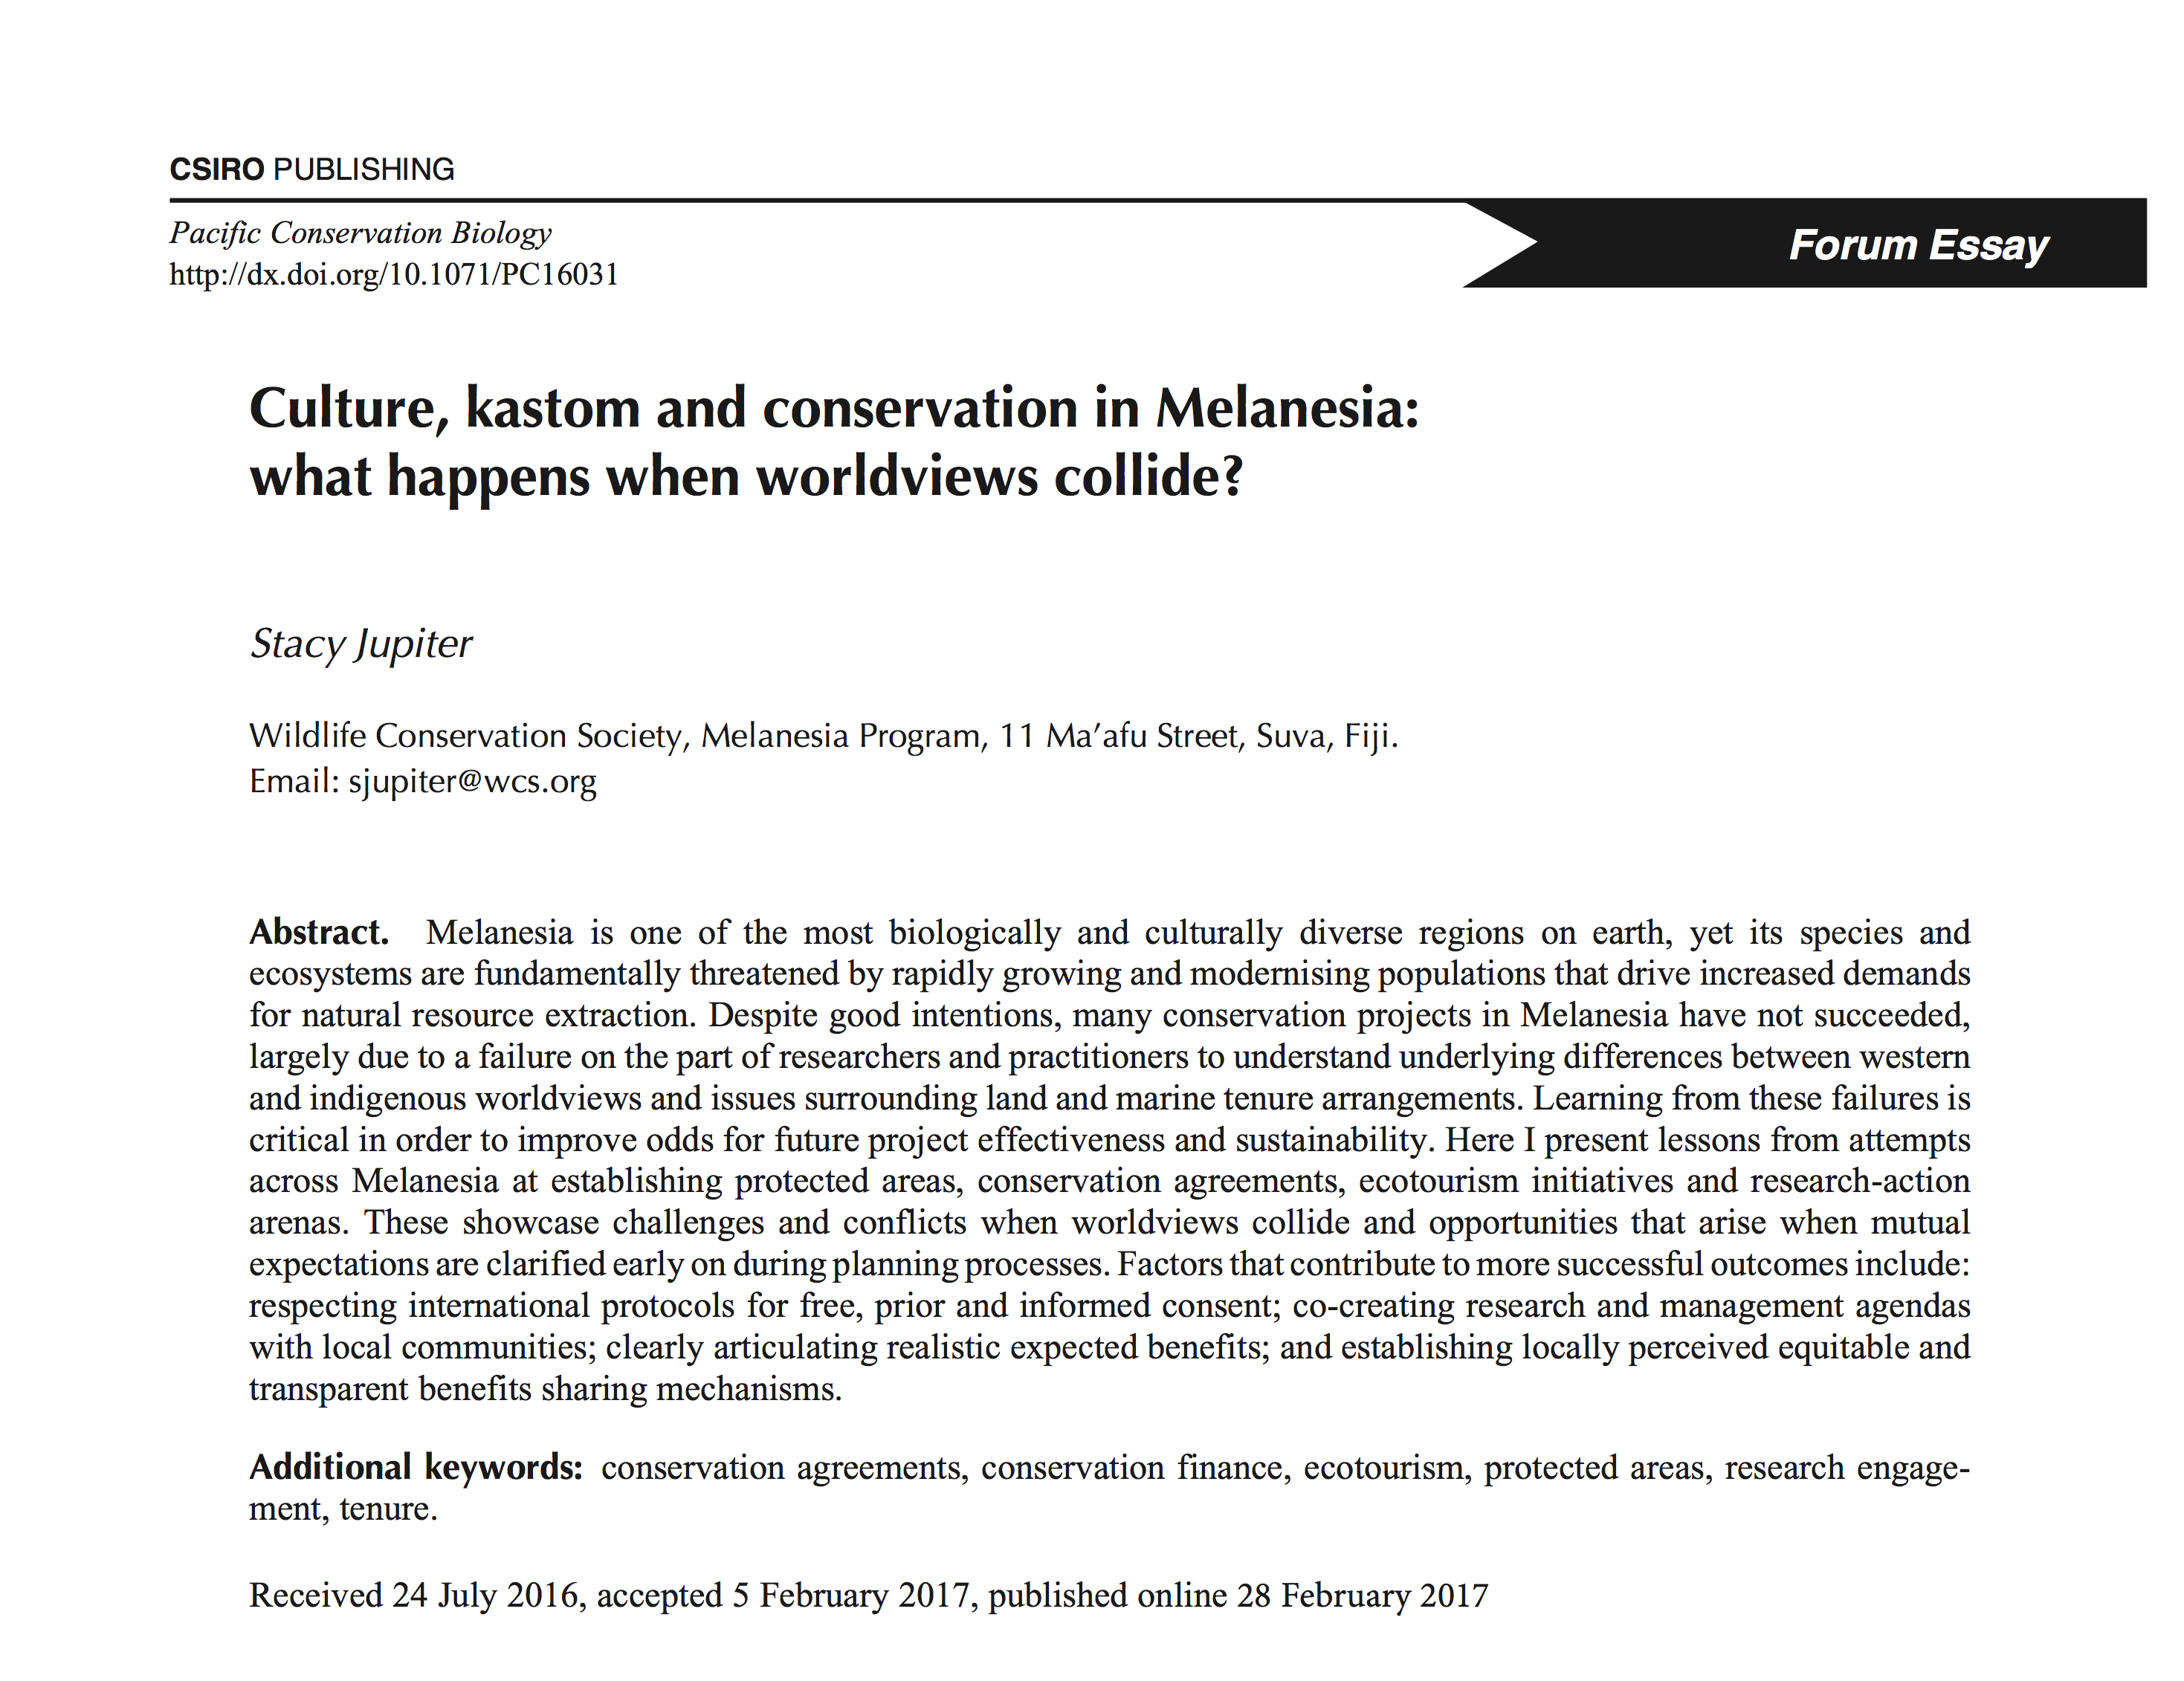 Culture, kastom and conservation in Melanesia: what happens when worldviews collide?